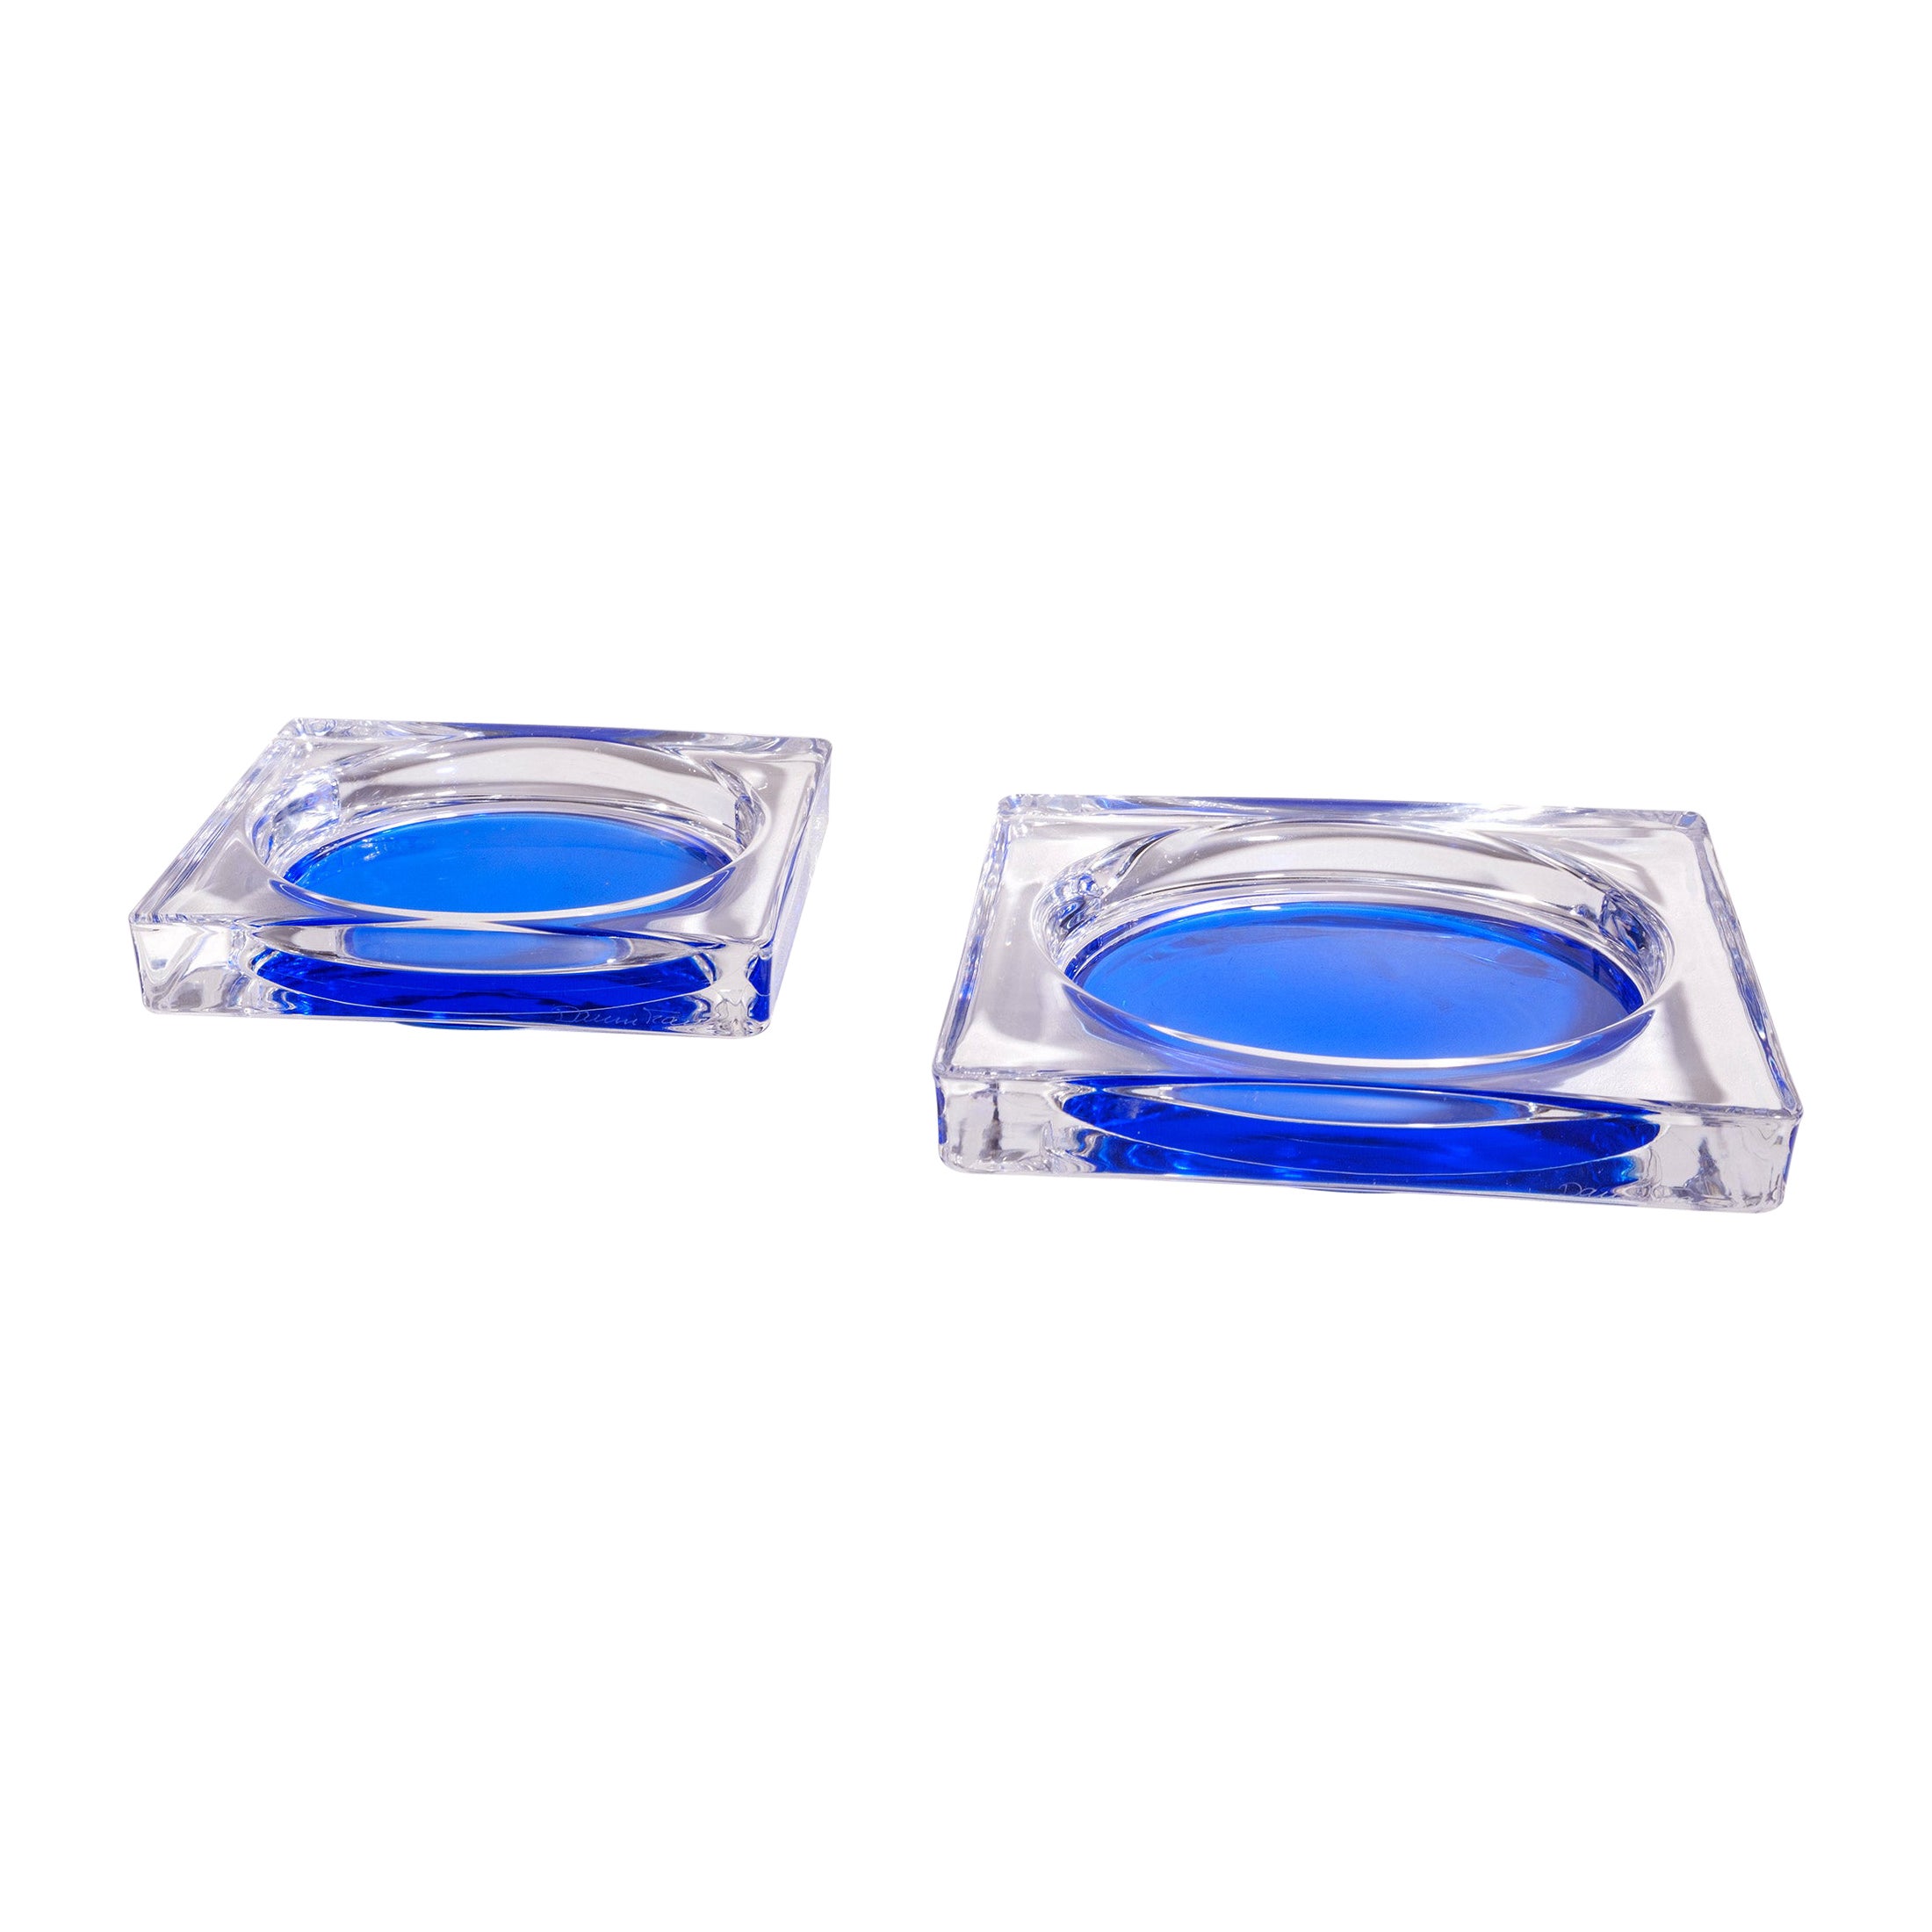 Crystal Glass Trays from Daum, France For Sale